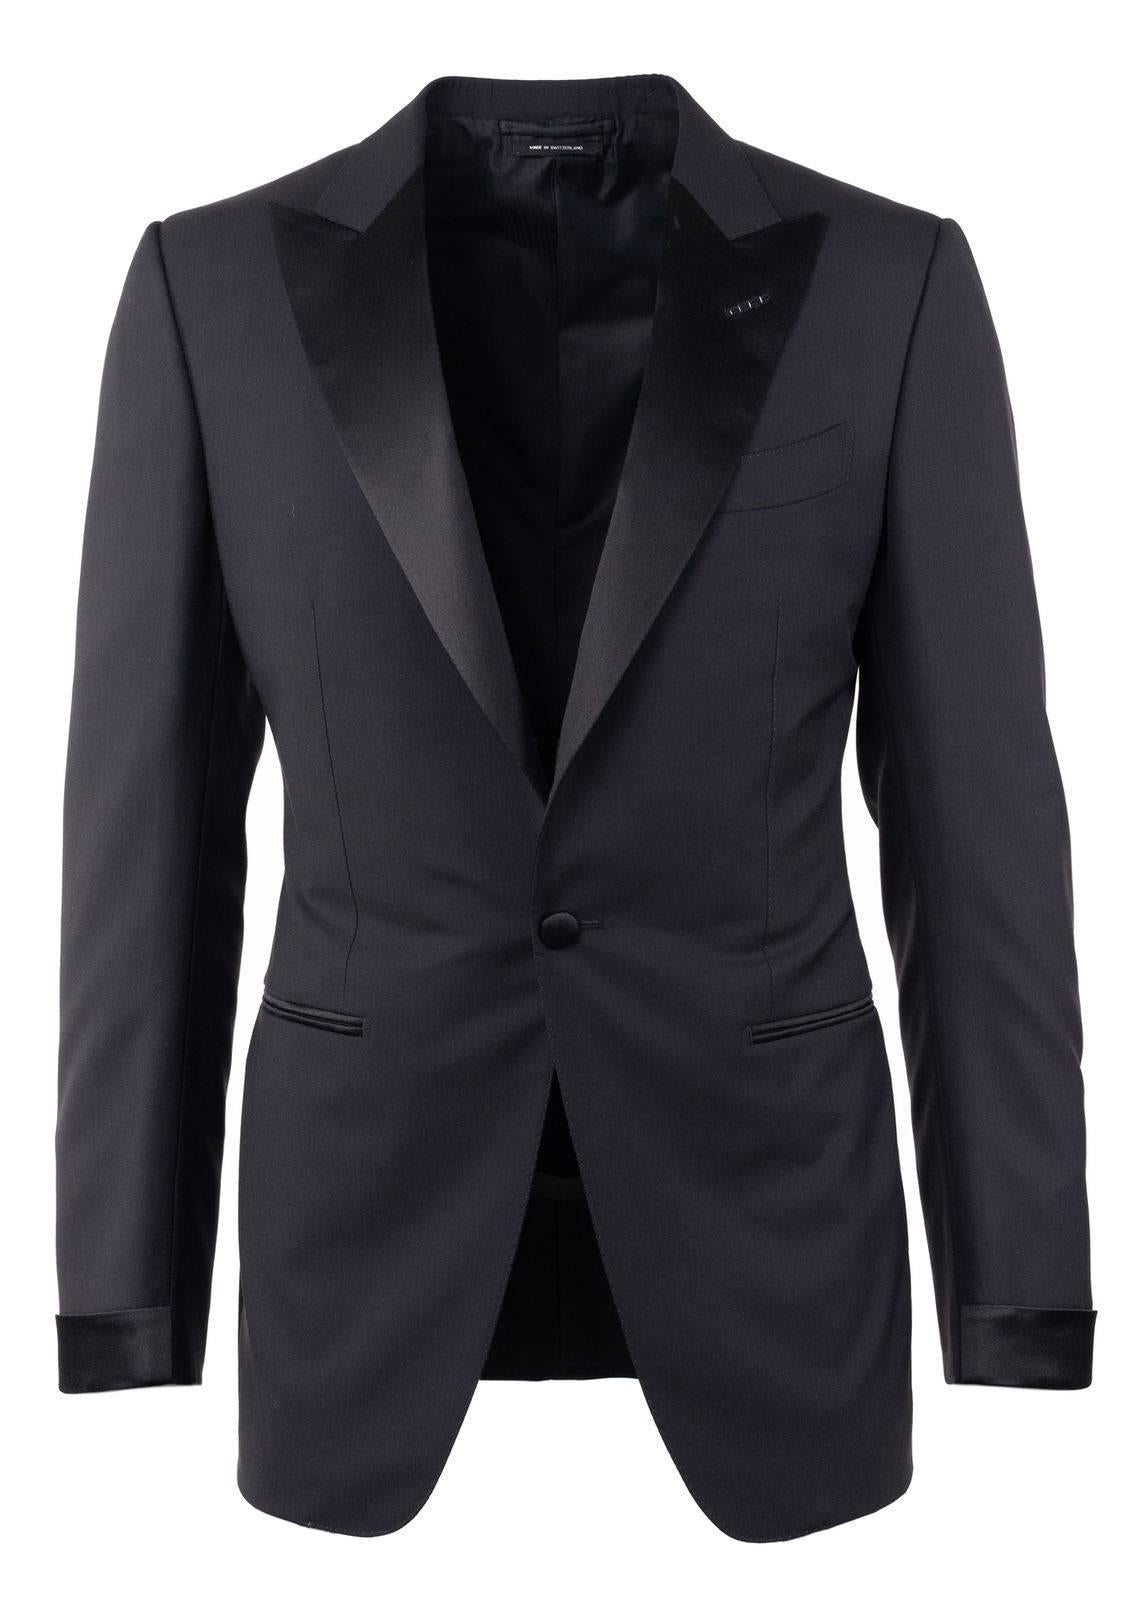 Tom Ford's Tuxedo Suit is the perfect suit for the modern man. This high quality wool suit was designed in Switzerland. Pair this satin lapel two piece with polished leather shoes and start your night off right.

Composition: 100% Wool
Peak Satin